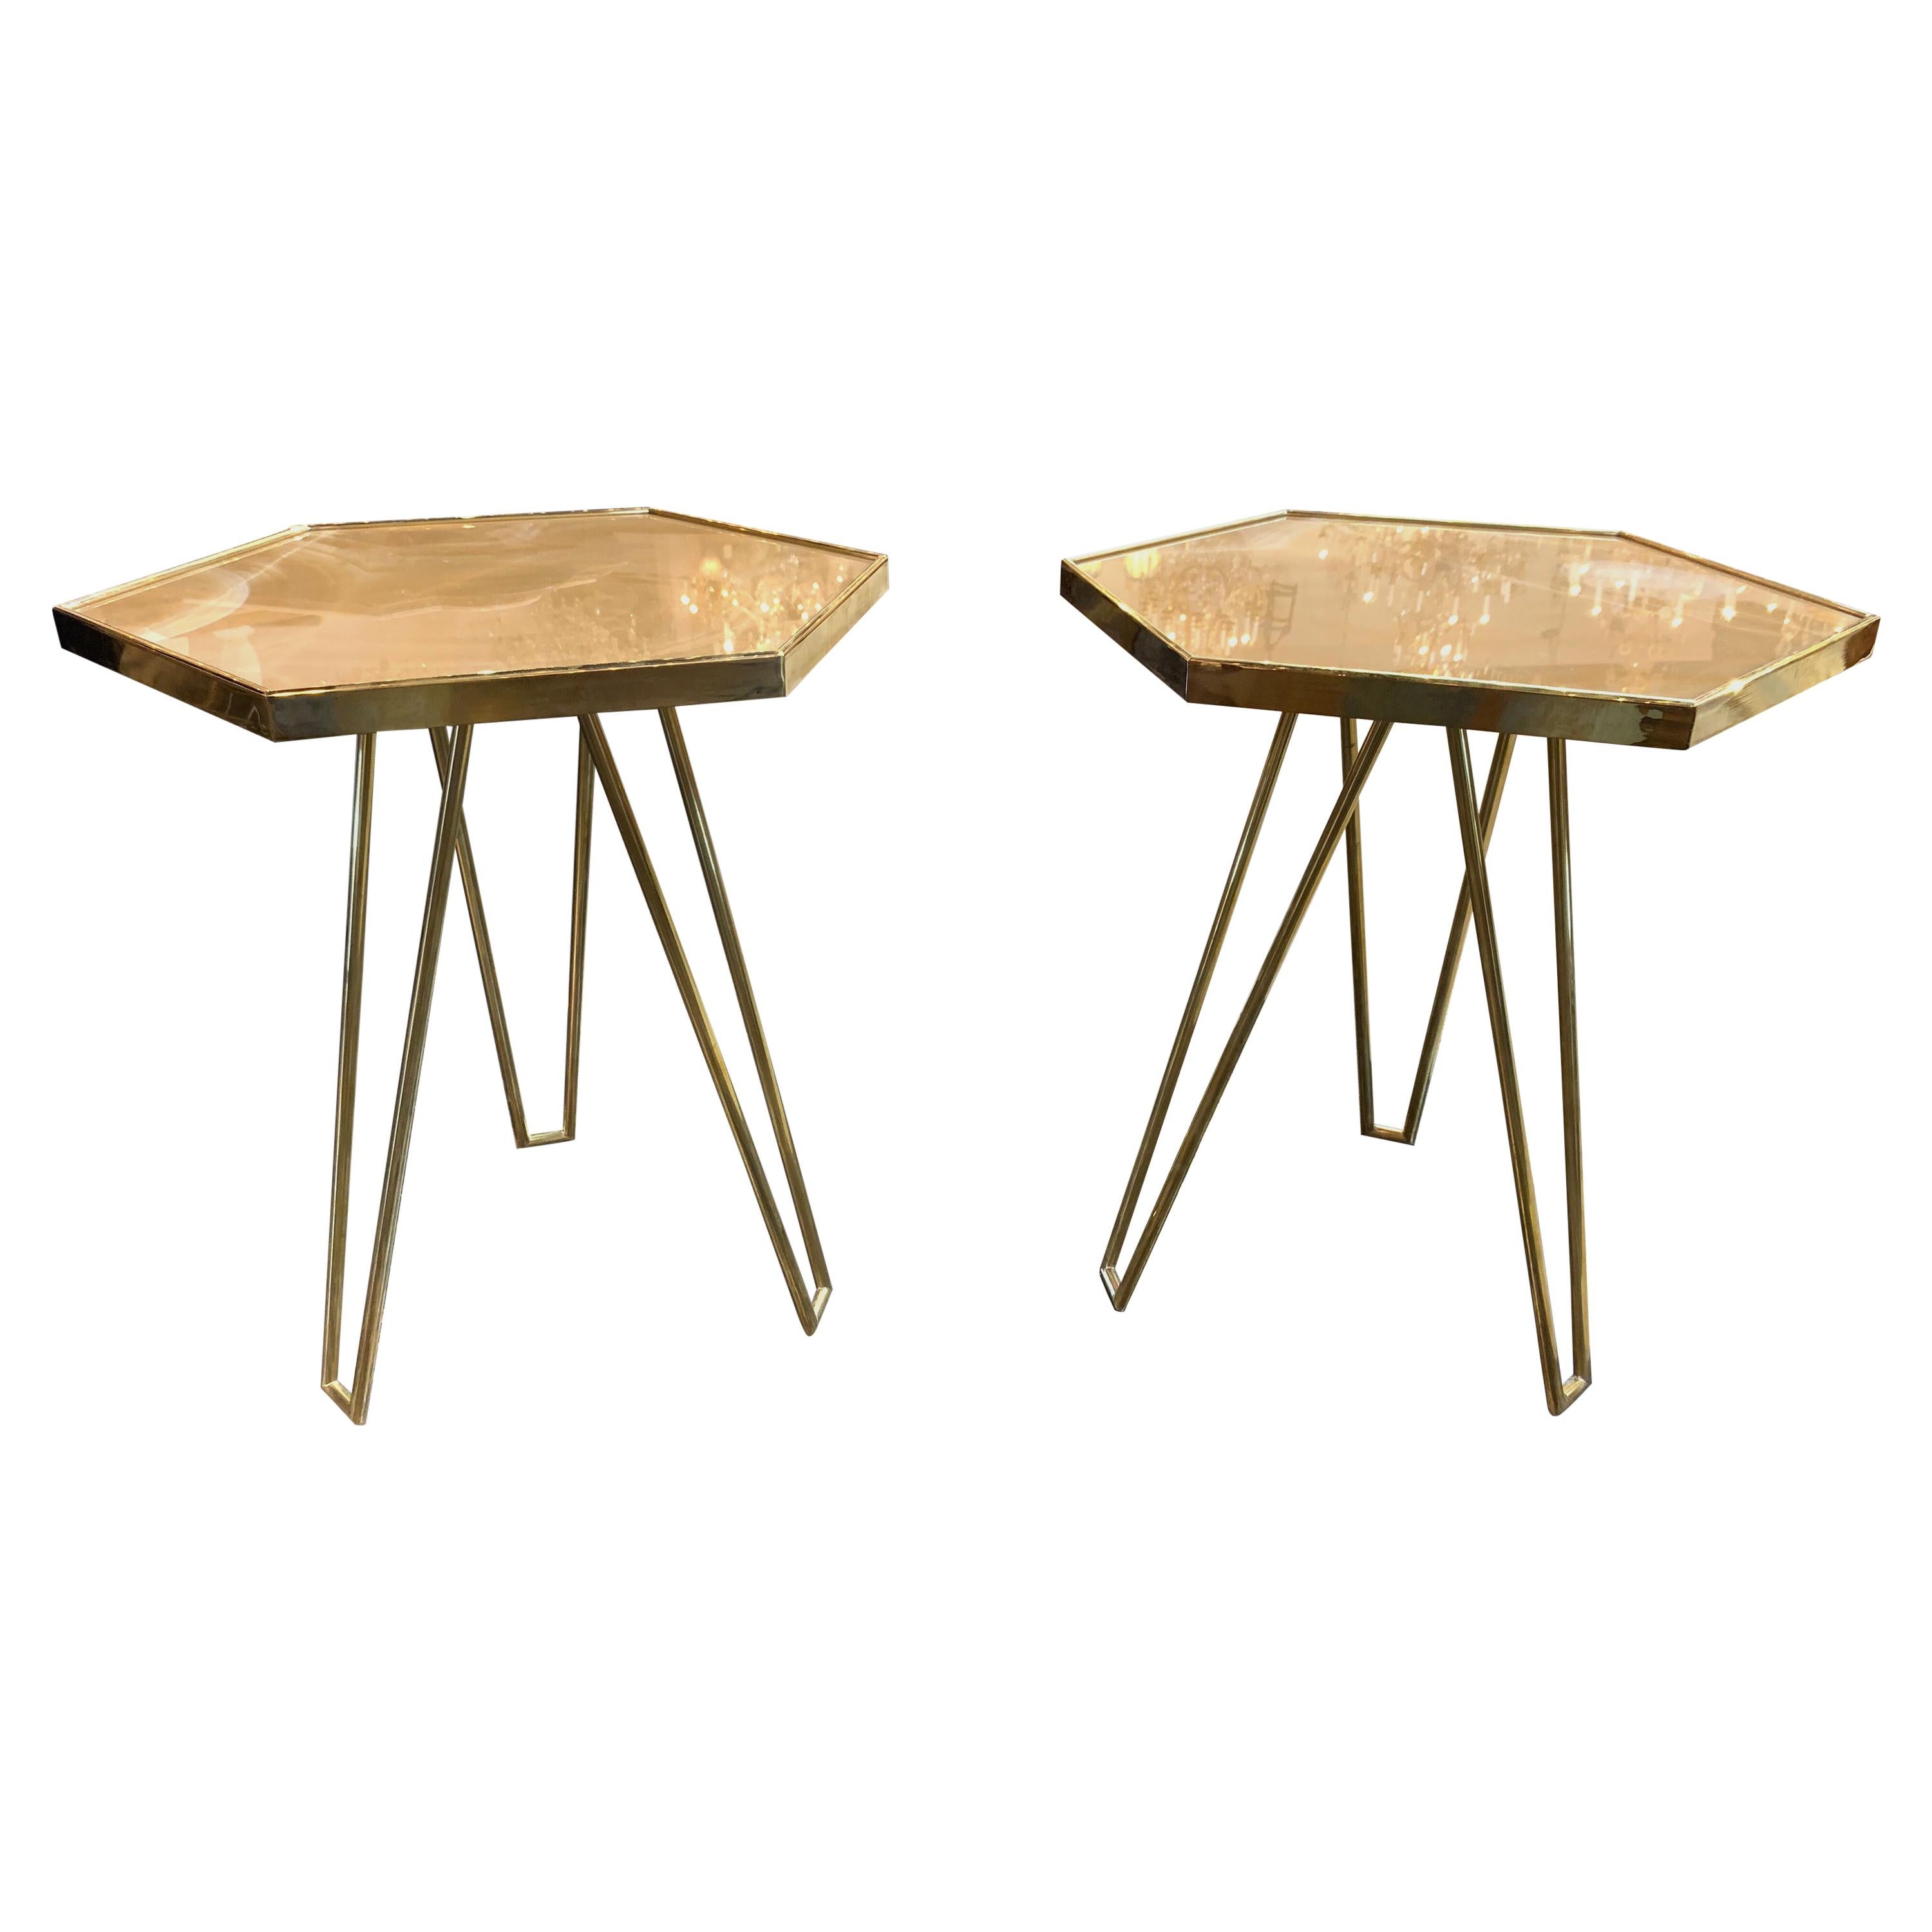 Pair of Italian Made Brass and Onyx Hexagonal Side Tables